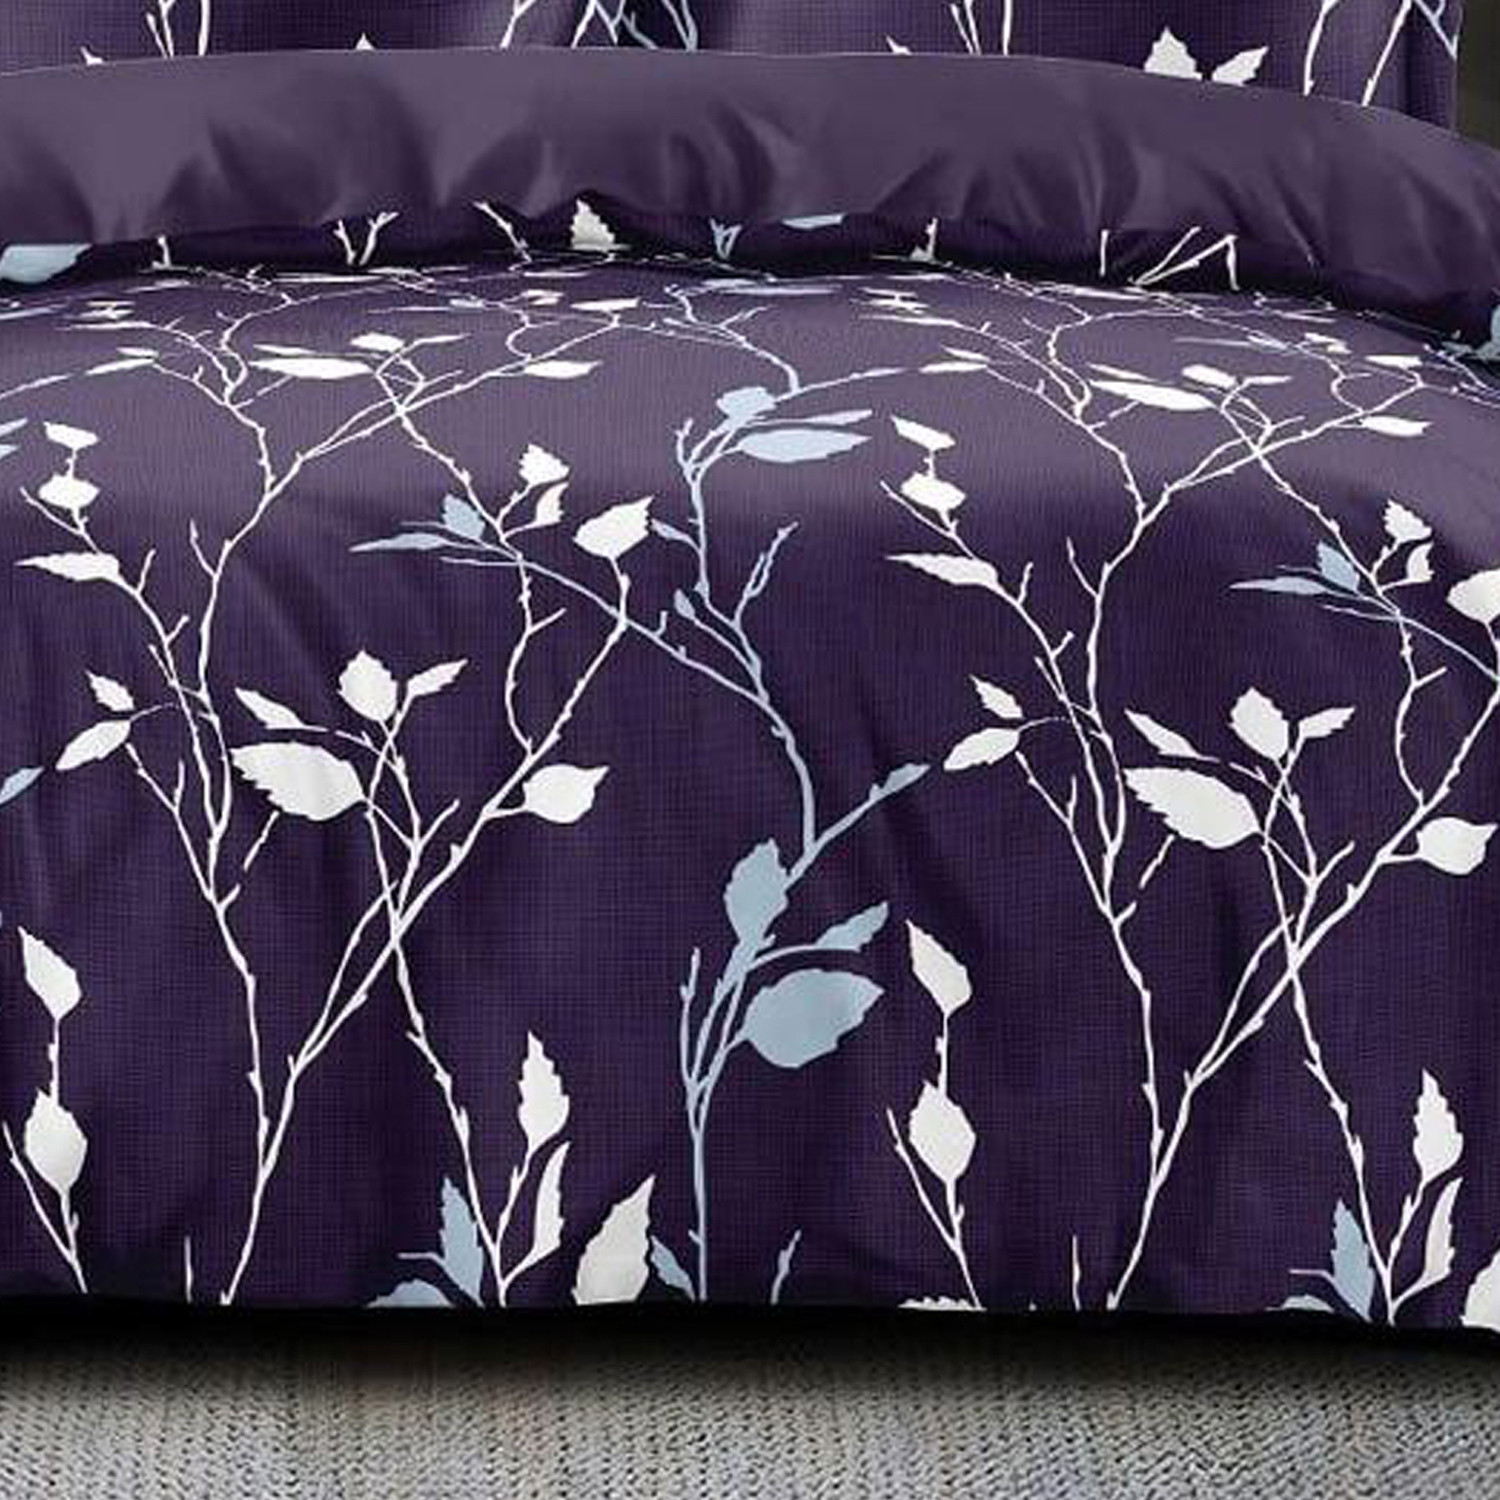 Kuber Industries Leaf Print Glace Cotton AC Comforter King Size Bed Comforter, Double Bed Sheet, 2 Pillow Cover (Purple, 90x100 Inches)-Set of 4 Pieces